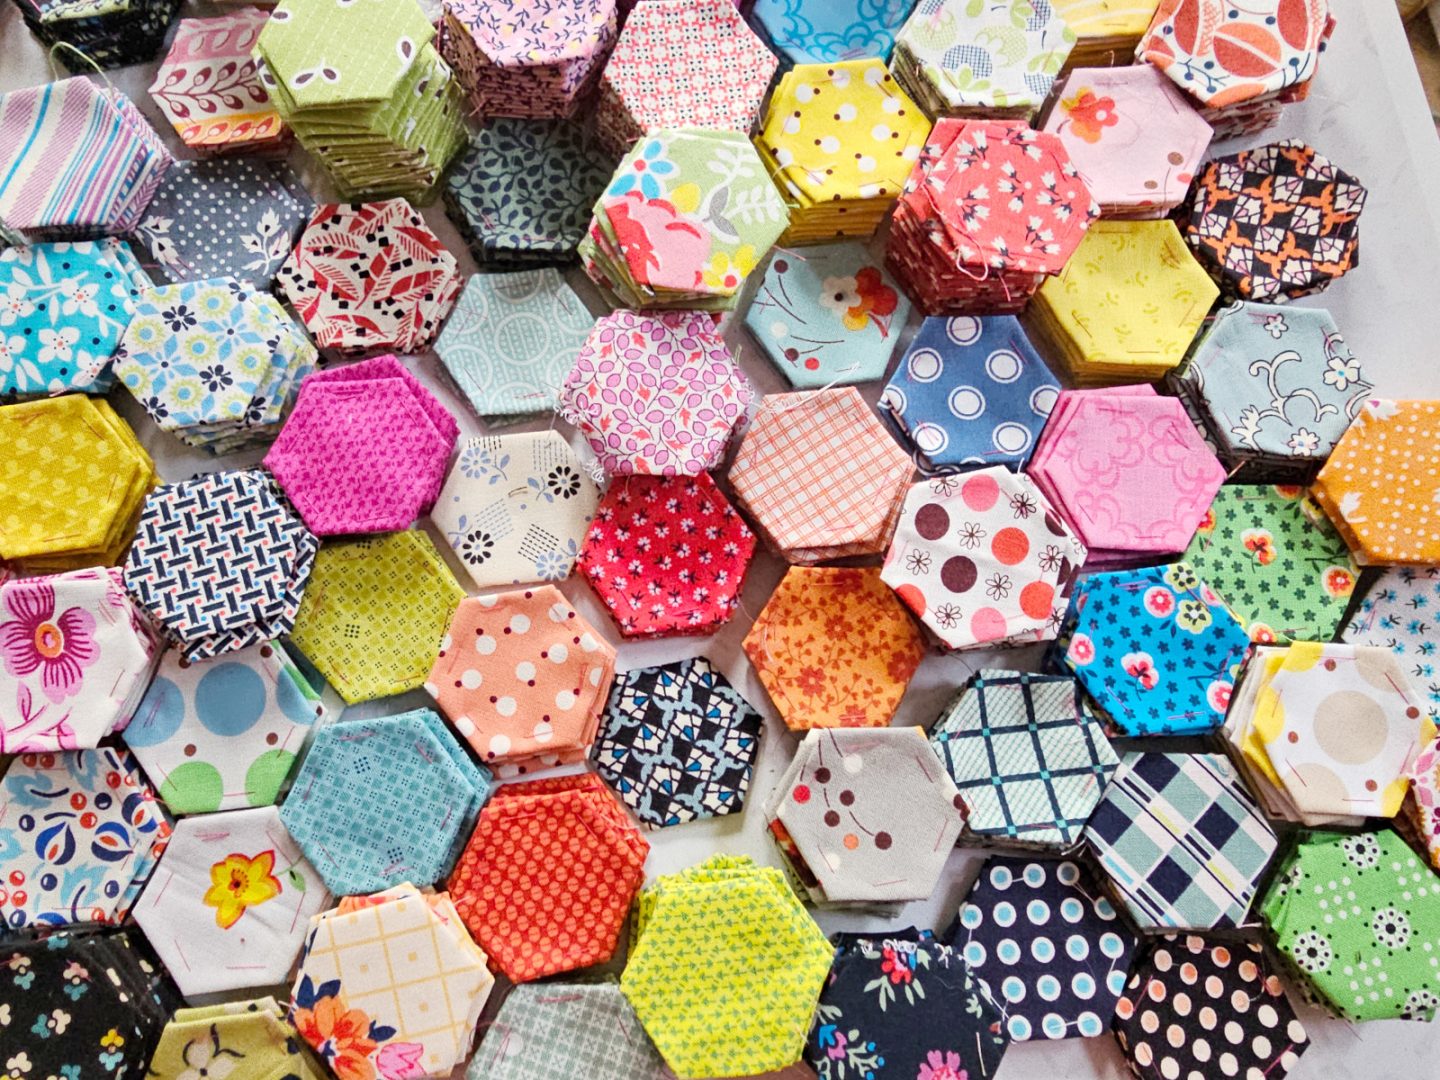 Overhead view of fabric hexagons in many different fabric prints.